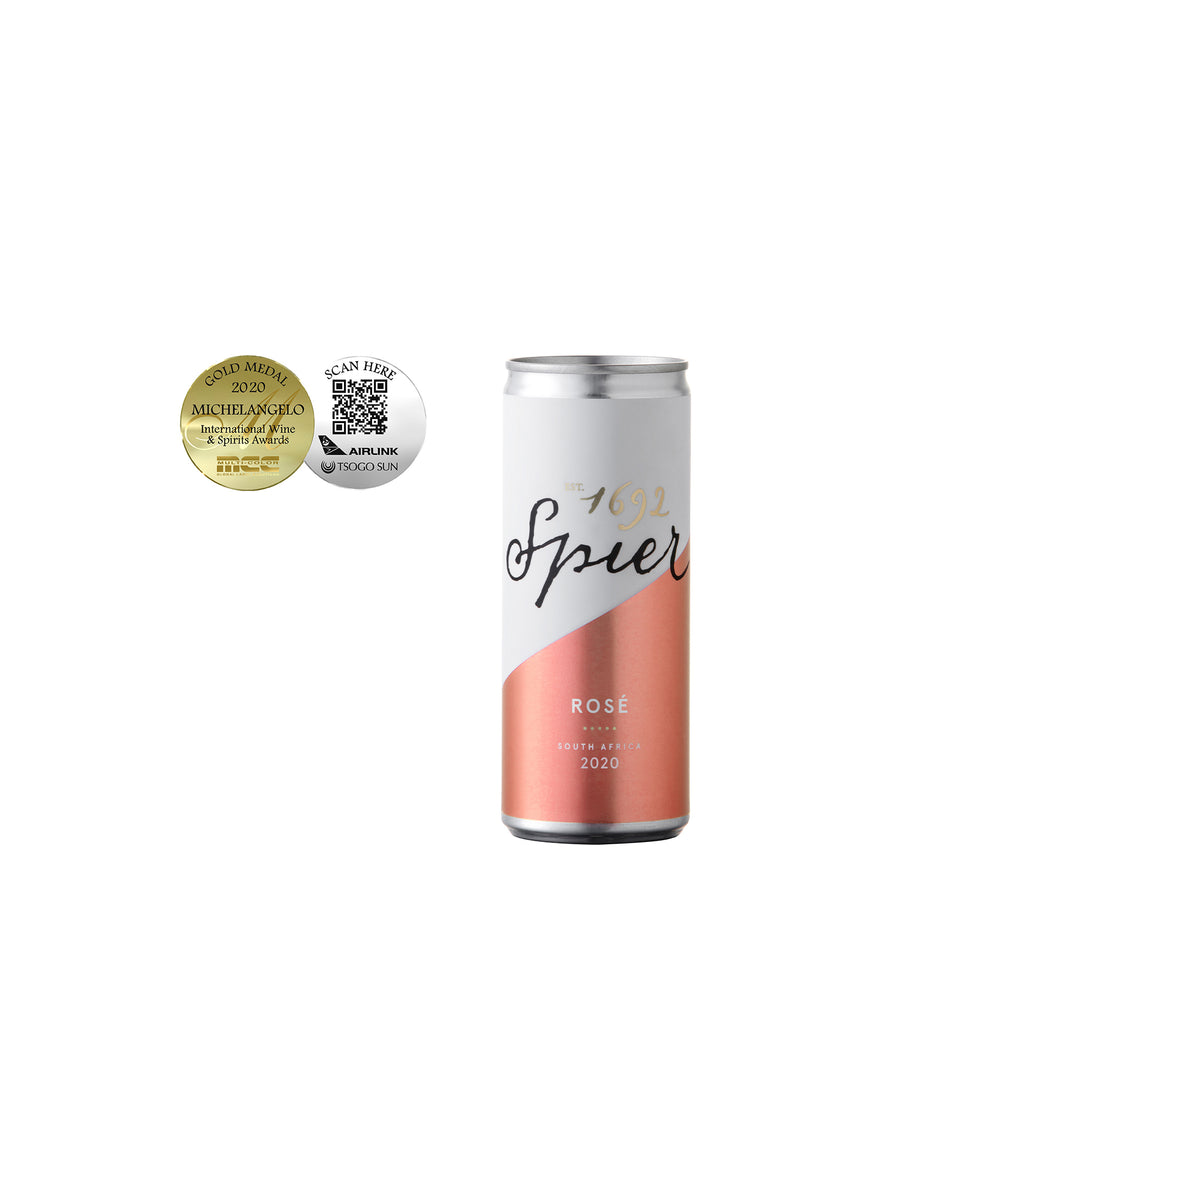 Canned Rosé